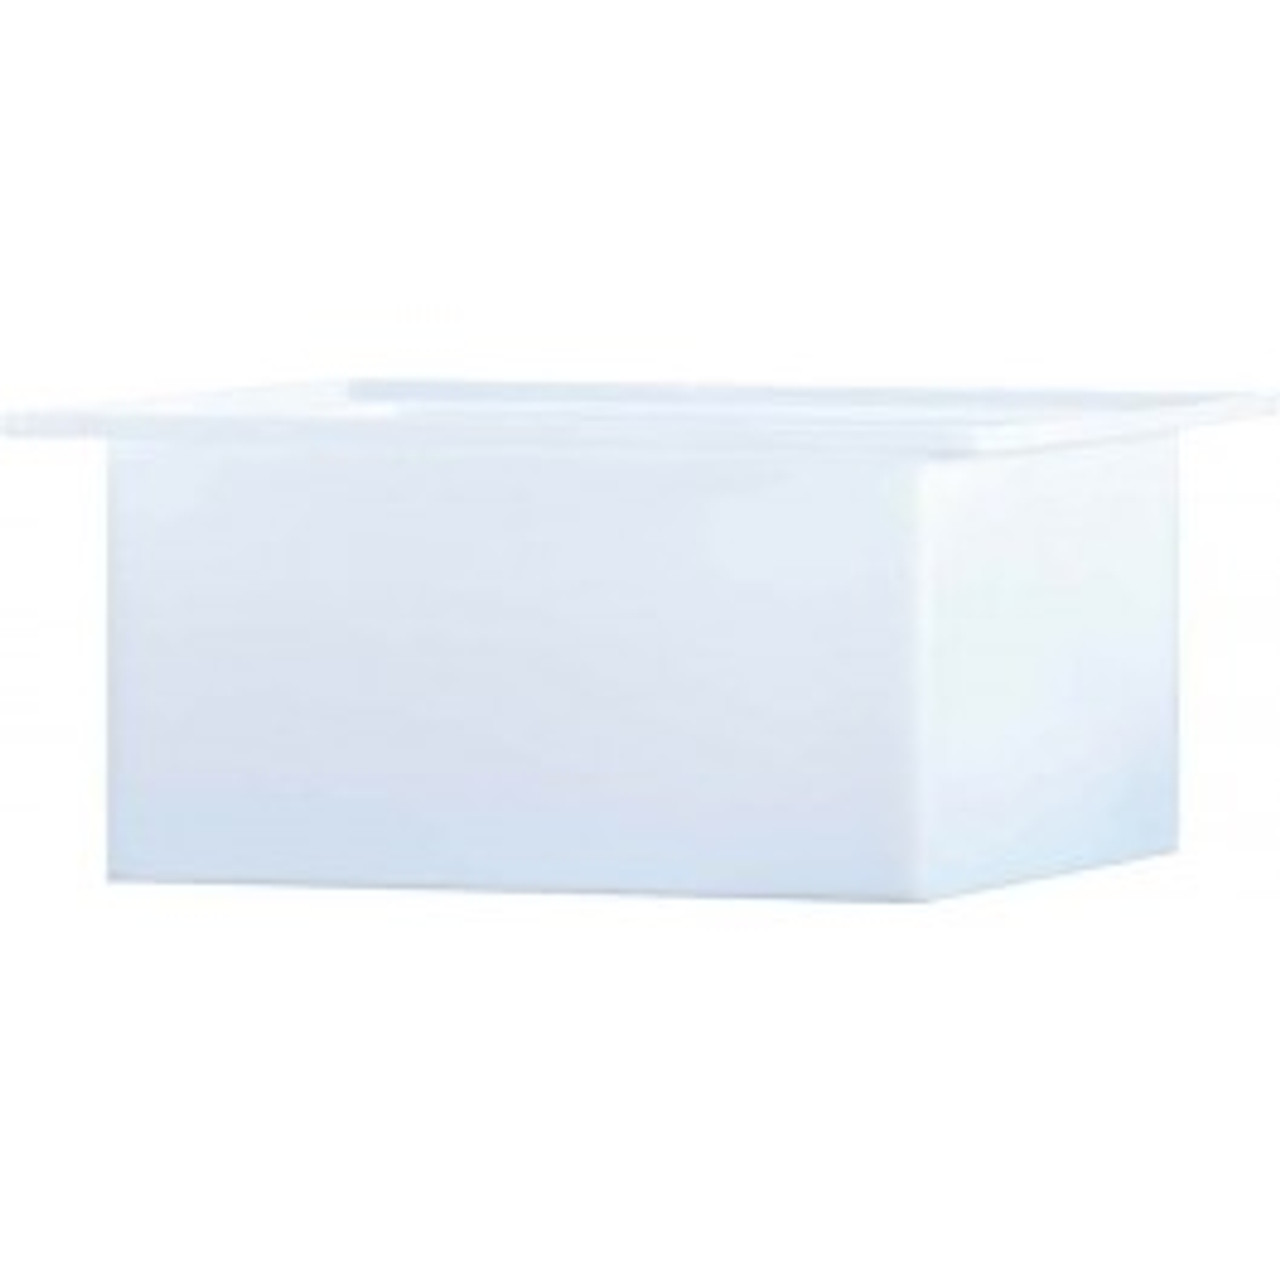 An image of a 120 Gallon PP Chem-Tainer White Rectangular Open Top Tank | R244824B